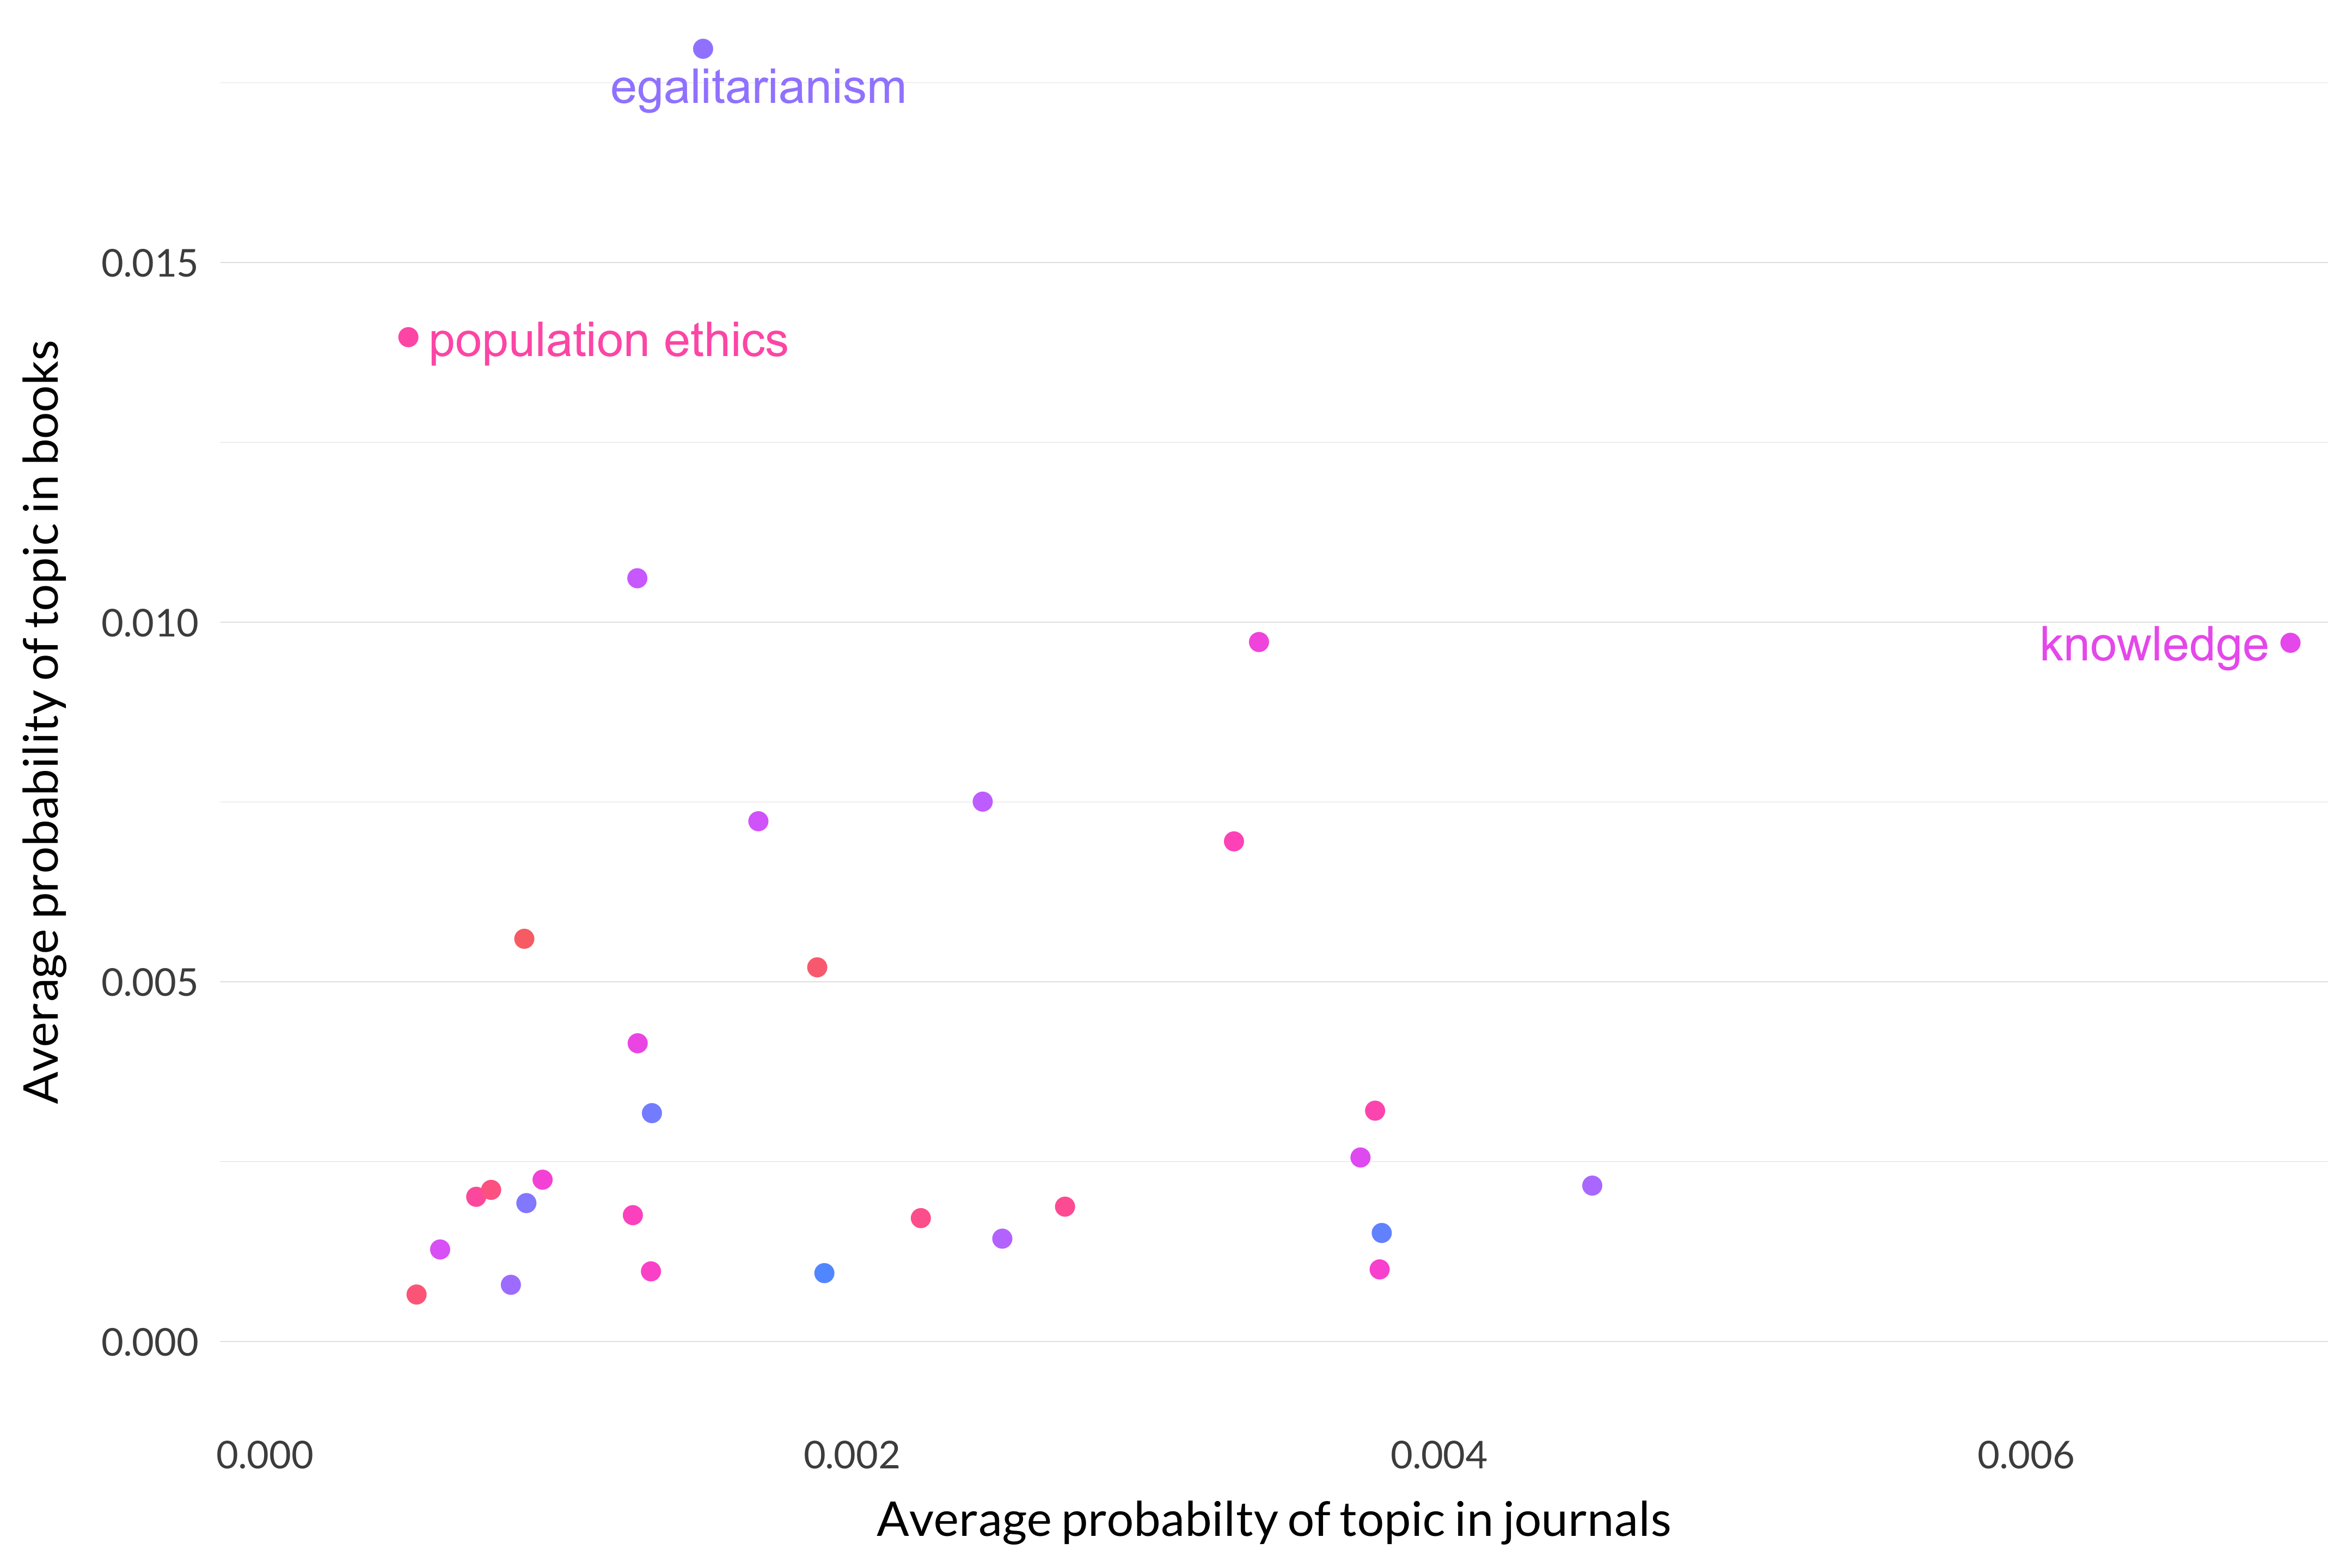 A scatterplot comparing the average probability distribution of topics 61-90 in journal articles up to 1925 and in the books being discussed. Average probabilities are generally lower for journals. Egalitarianism and population ethics are much higher for books; knowledge is also higher in books.